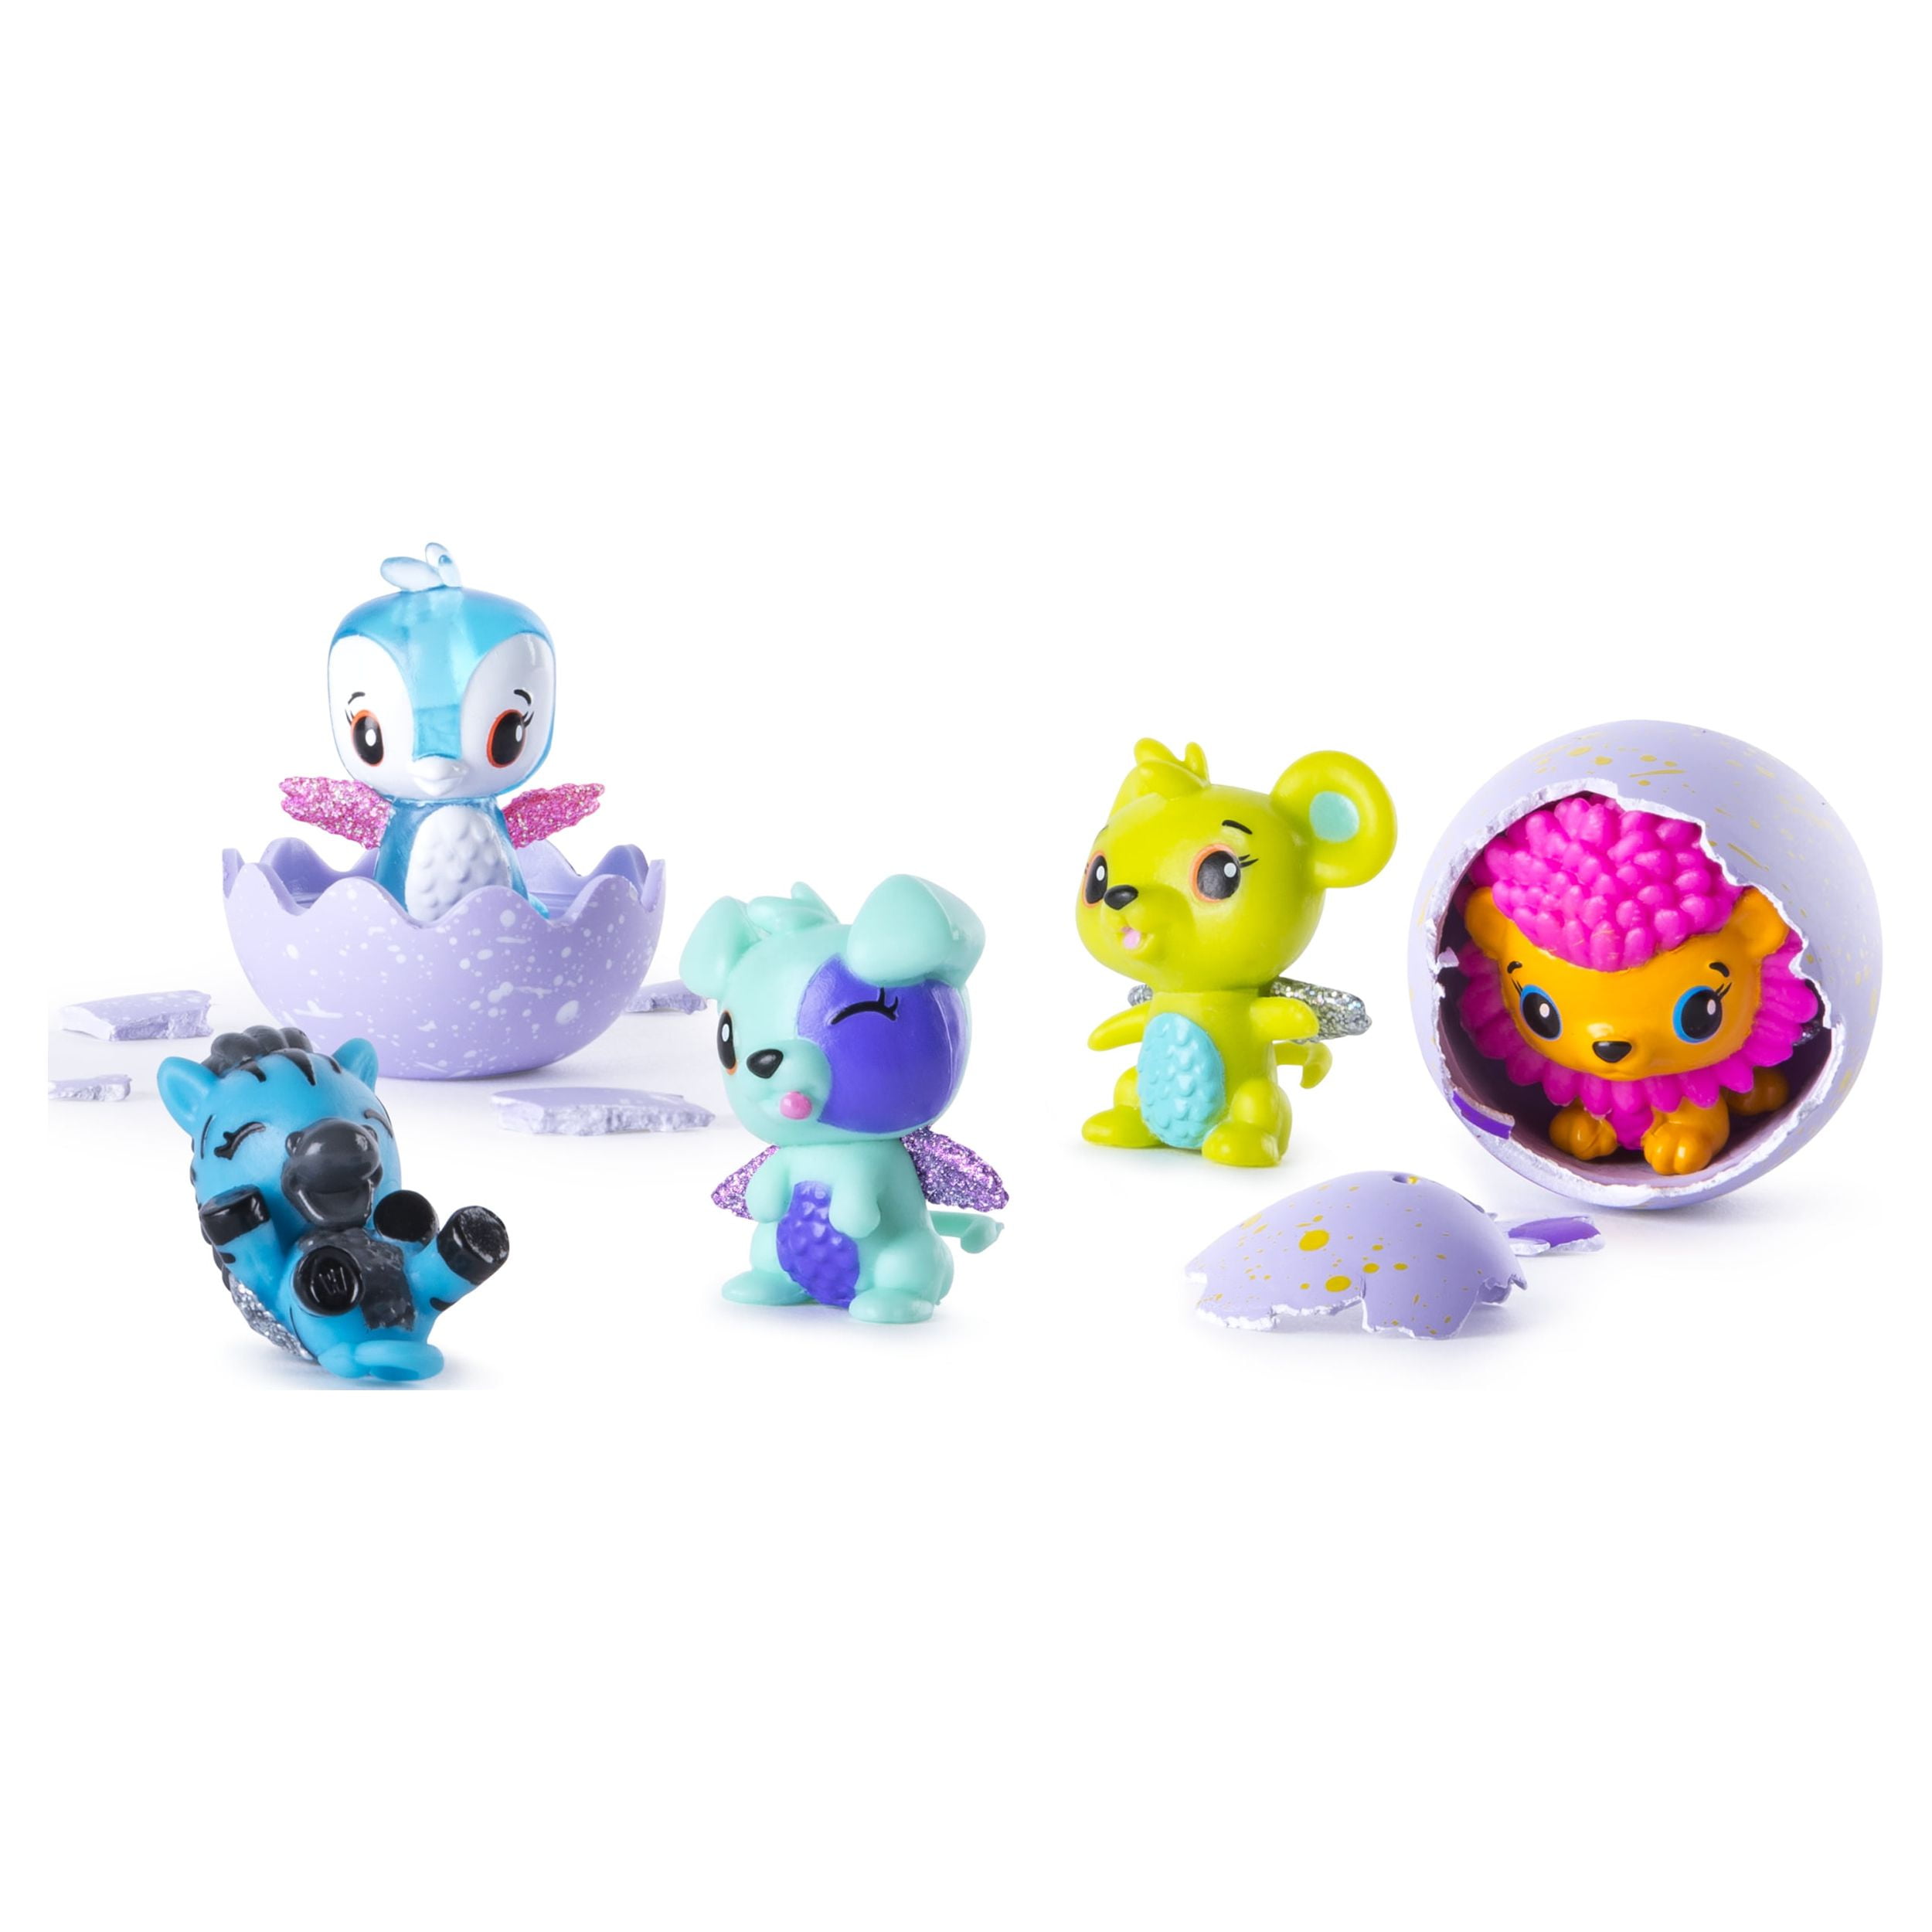 Hatchimals - CollEGGtibles - 4-Pack + Bonus (Styles & Colors May Vary) by  Spin Master